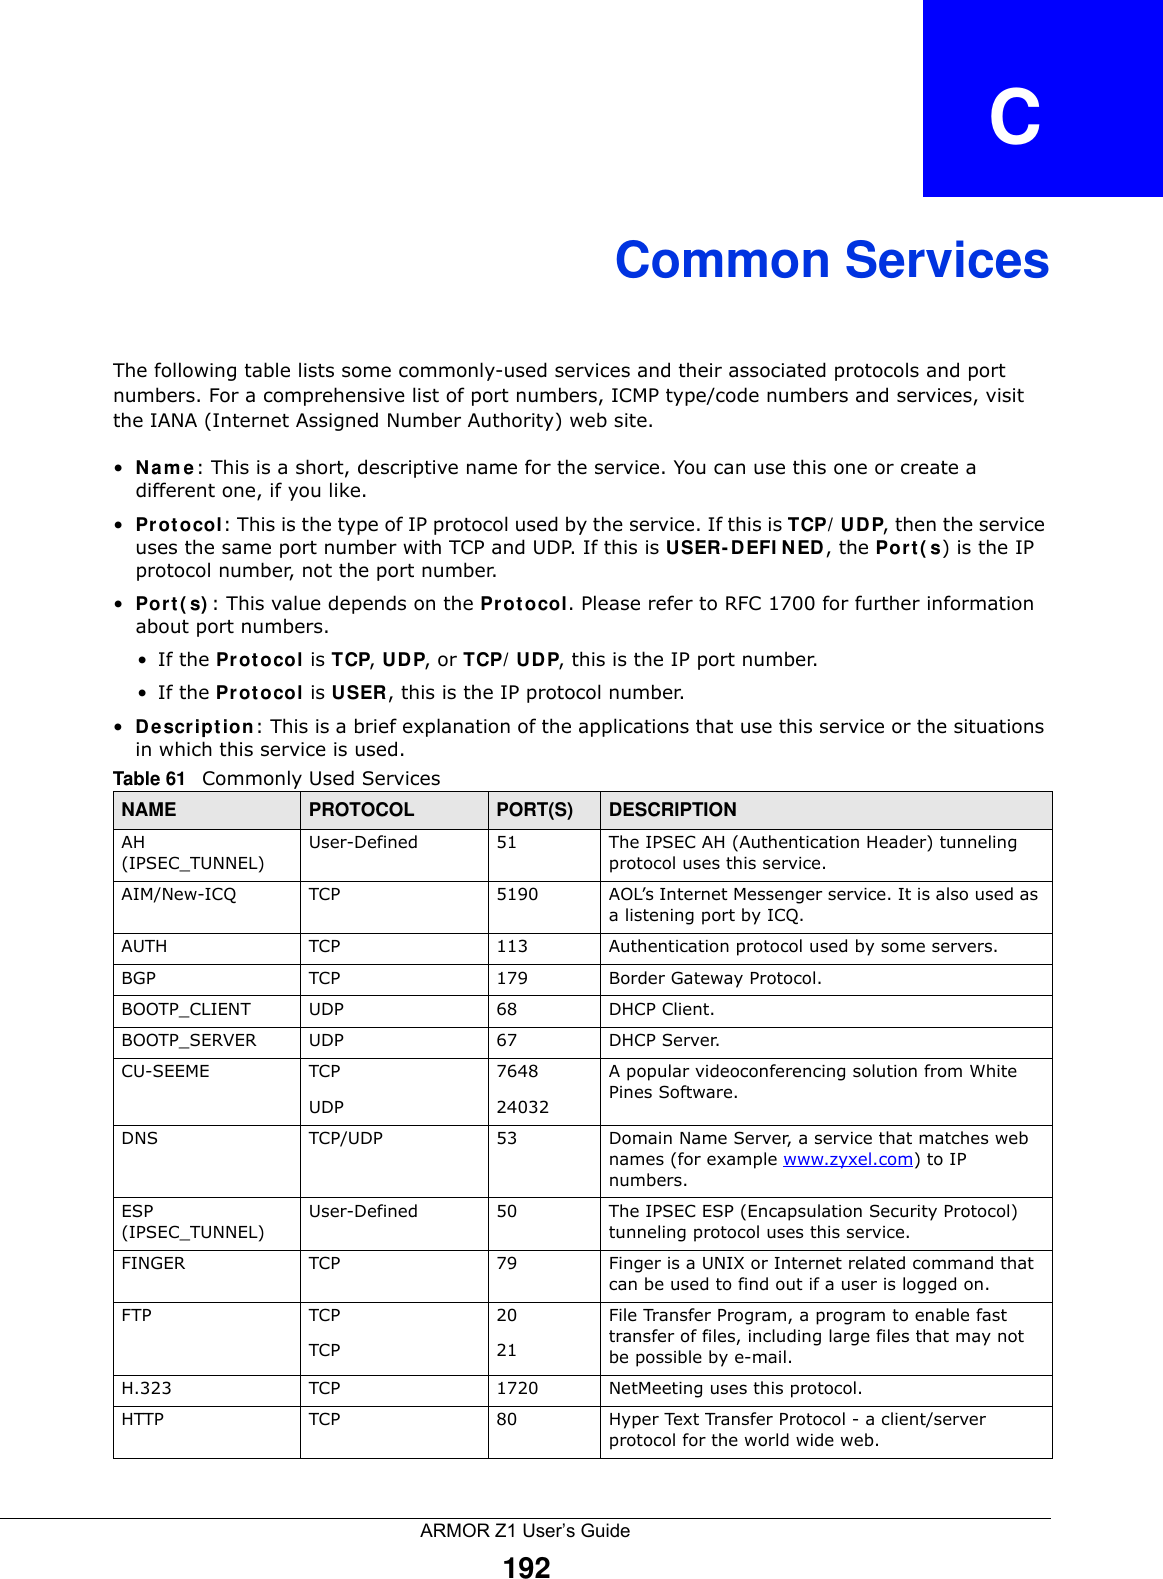 ARMOR Z1 User’s Guide192APPENDIX   CCommon ServicesThe following table lists some commonly-used services and their associated protocols and port numbers. For a comprehensive list of port numbers, ICMP type/code numbers and services, visit the IANA (Internet Assigned Number Authority) web site. •Name: This is a short, descriptive name for the service. You can use this one or create a different one, if you like.•Protocol: This is the type of IP protocol used by the service. If this is TCP/UDP, then the service uses the same port number with TCP and UDP. If this is USER-DEFINED, the Port(s) is the IP protocol number, not the port number.•Port(s): This value depends on the Protocol. Please refer to RFC 1700 for further information about port numbers.•If the Protocol is TCP, UDP, or TCP/UDP, this is the IP port number.•If the Protocol is USER, this is the IP protocol number.•Description: This is a brief explanation of the applications that use this service or the situations in which this service is used.Table 61   Commonly Used ServicesNAME PROTOCOL PORT(S) DESCRIPTIONAH (IPSEC_TUNNEL)User-Defined 51 The IPSEC AH (Authentication Header) tunneling protocol uses this service.AIM/New-ICQ TCP 5190 AOL’s Internet Messenger service. It is also used as a listening port by ICQ.AUTH TCP 113 Authentication protocol used by some servers.BGP TCP 179 Border Gateway Protocol.BOOTP_CLIENT UDP 68 DHCP Client.BOOTP_SERVER UDP 67 DHCP Server.CU-SEEME TCPUDP764824032A popular videoconferencing solution from White Pines Software.DNS TCP/UDP 53 Domain Name Server, a service that matches web names (for example www.zyxel.com) to IP numbers.ESP (IPSEC_TUNNEL)User-Defined 50 The IPSEC ESP (Encapsulation Security Protocol) tunneling protocol uses this service.FINGER TCP 79 Finger is a UNIX or Internet related command that can be used to find out if a user is logged on.FTP TCPTCP2021File Transfer Program, a program to enable fast transfer of files, including large files that may not be possible by e-mail.H.323 TCP 1720 NetMeeting uses this protocol.HTTP TCP 80 Hyper Text Transfer Protocol - a client/server protocol for the world wide web.